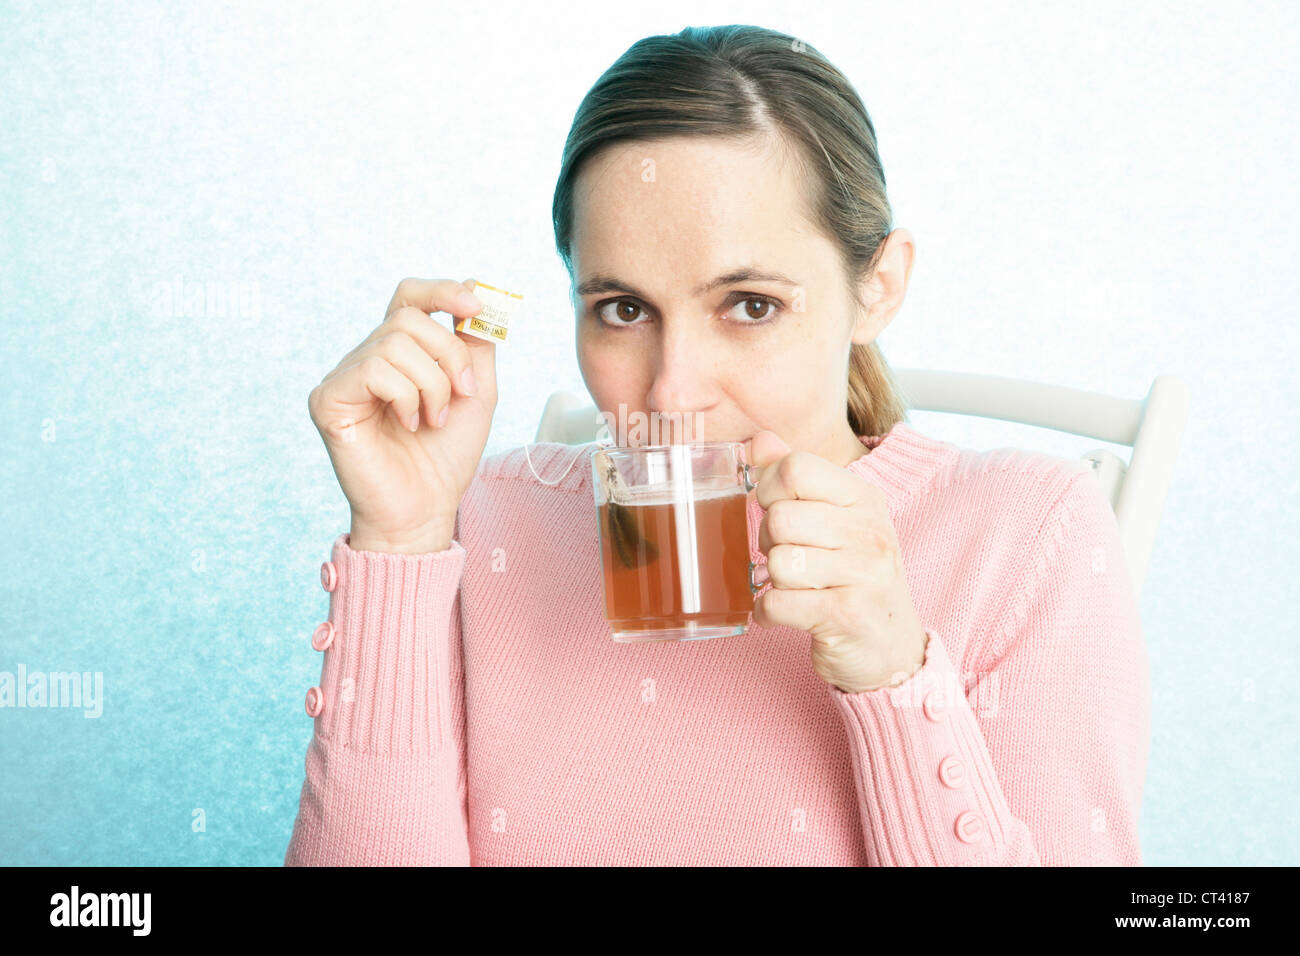 WOMAN WITH HOT DRINK Stock Photo